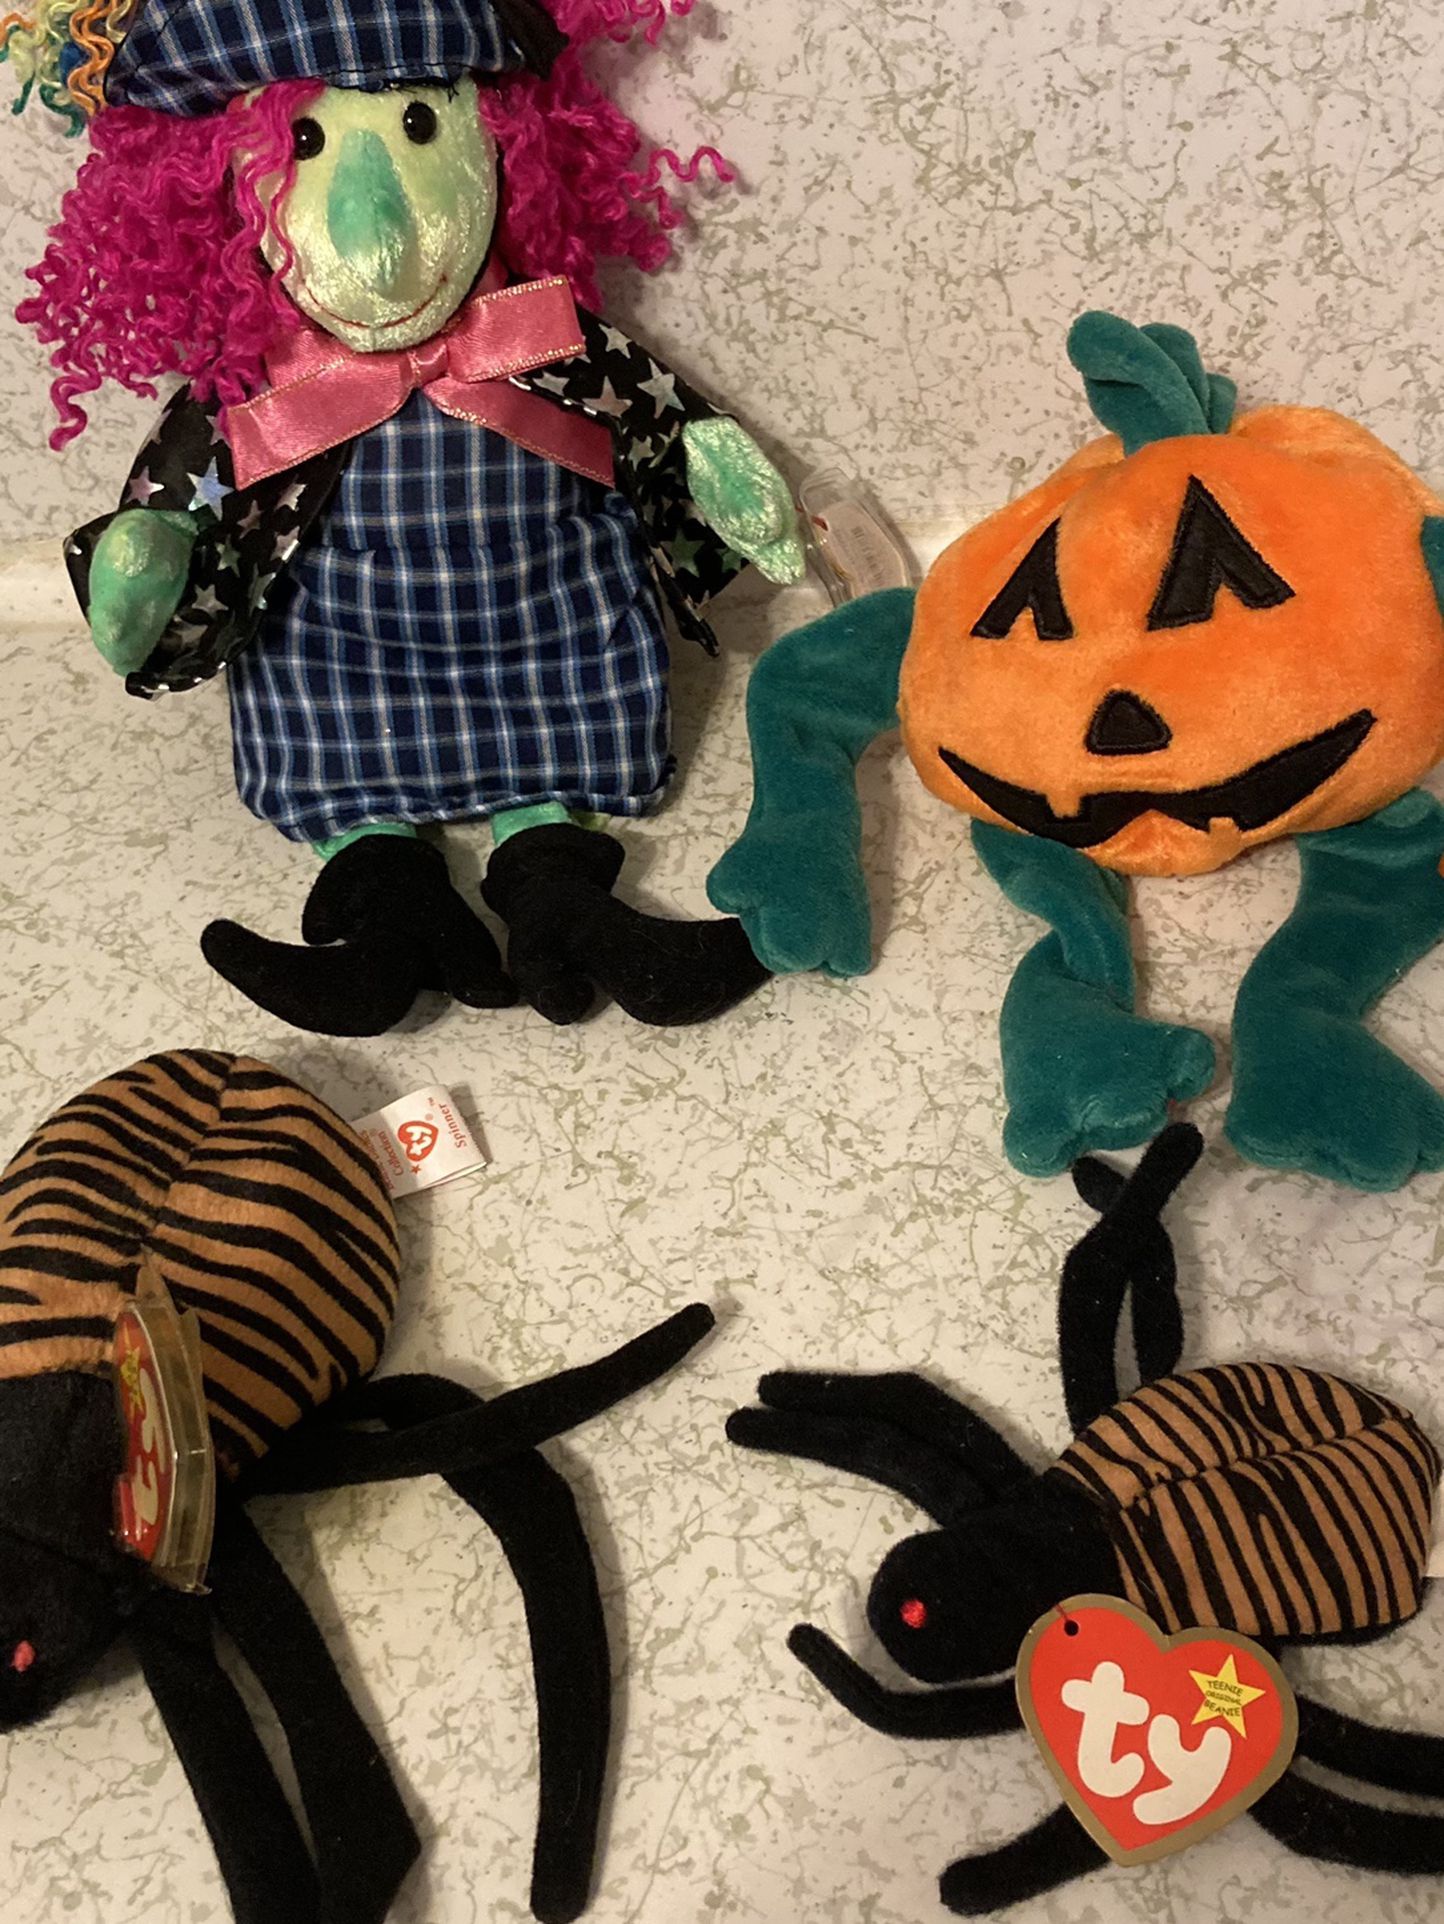  What’s Halloween without TY Beanie babies